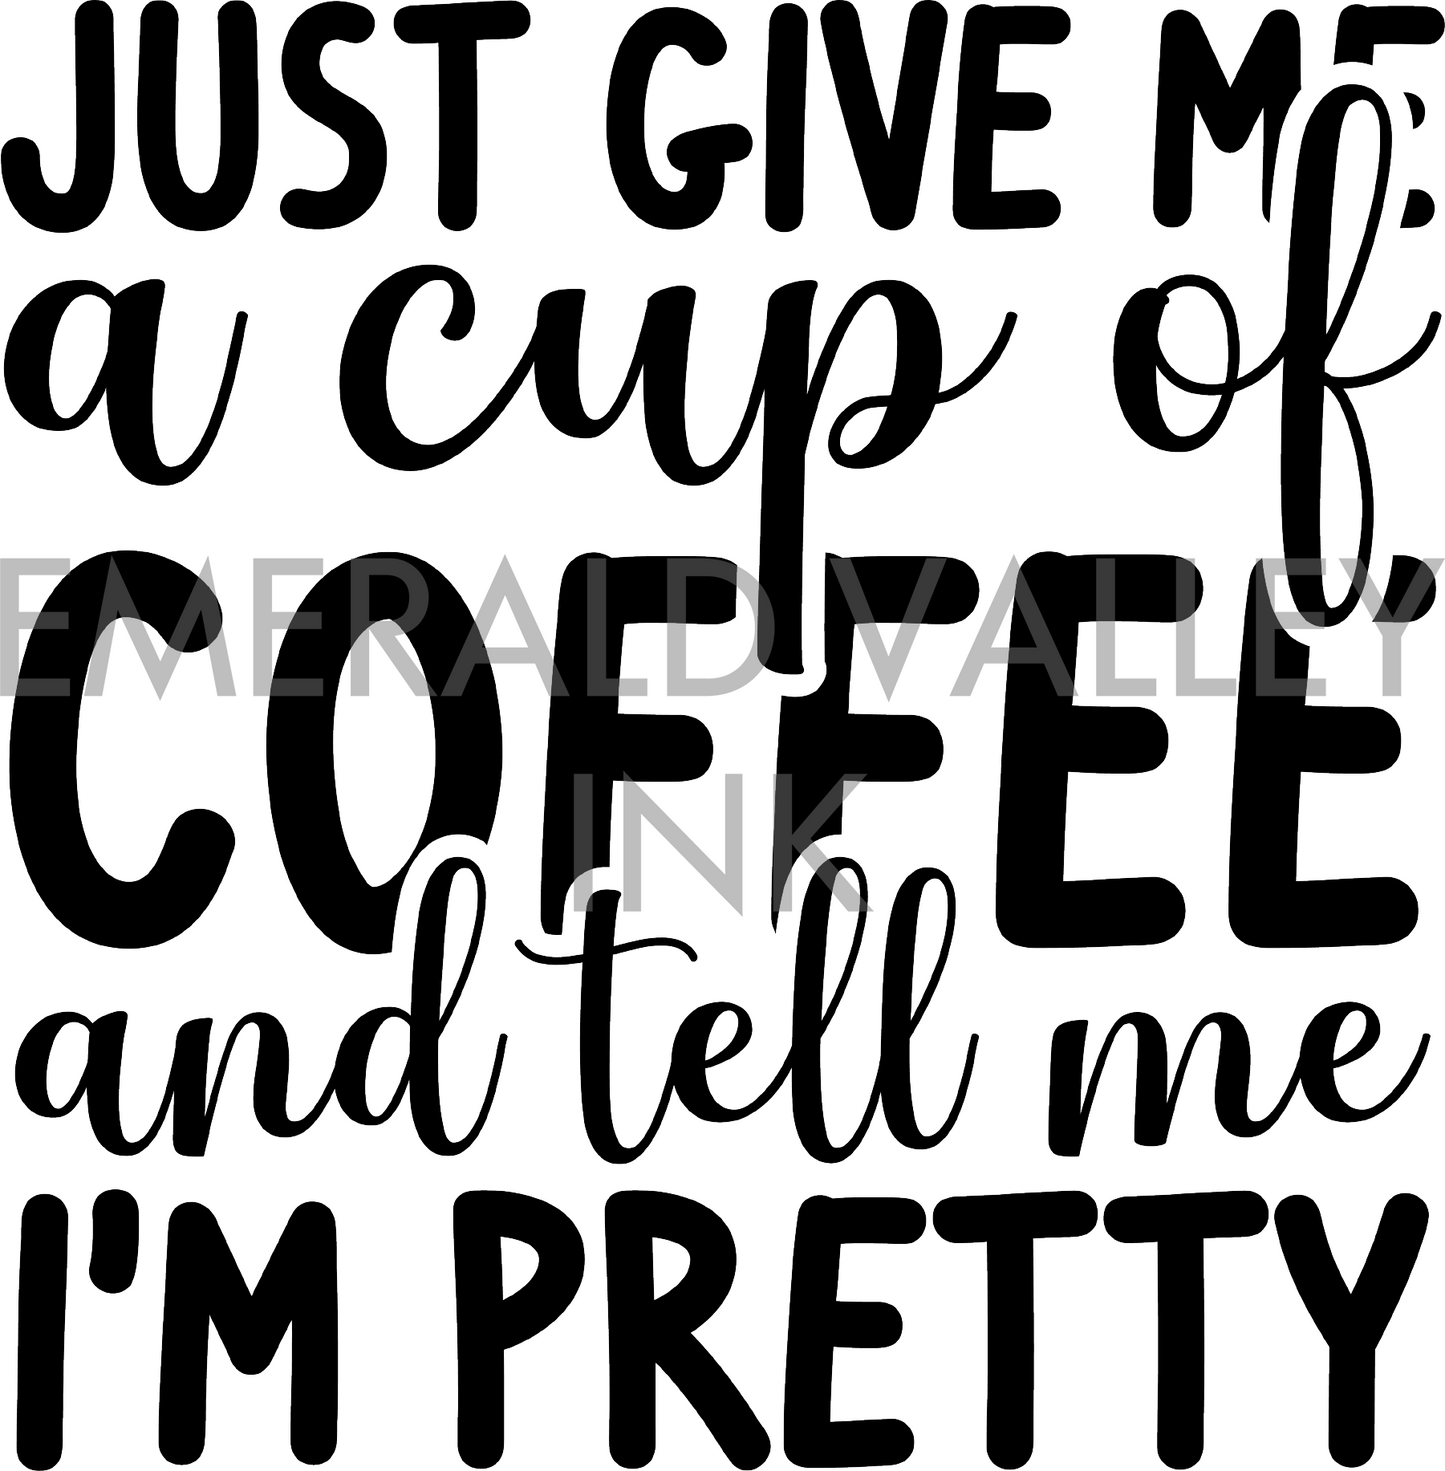 Just Give Me a Cup of Coffee, and Tell me I'm Pretty